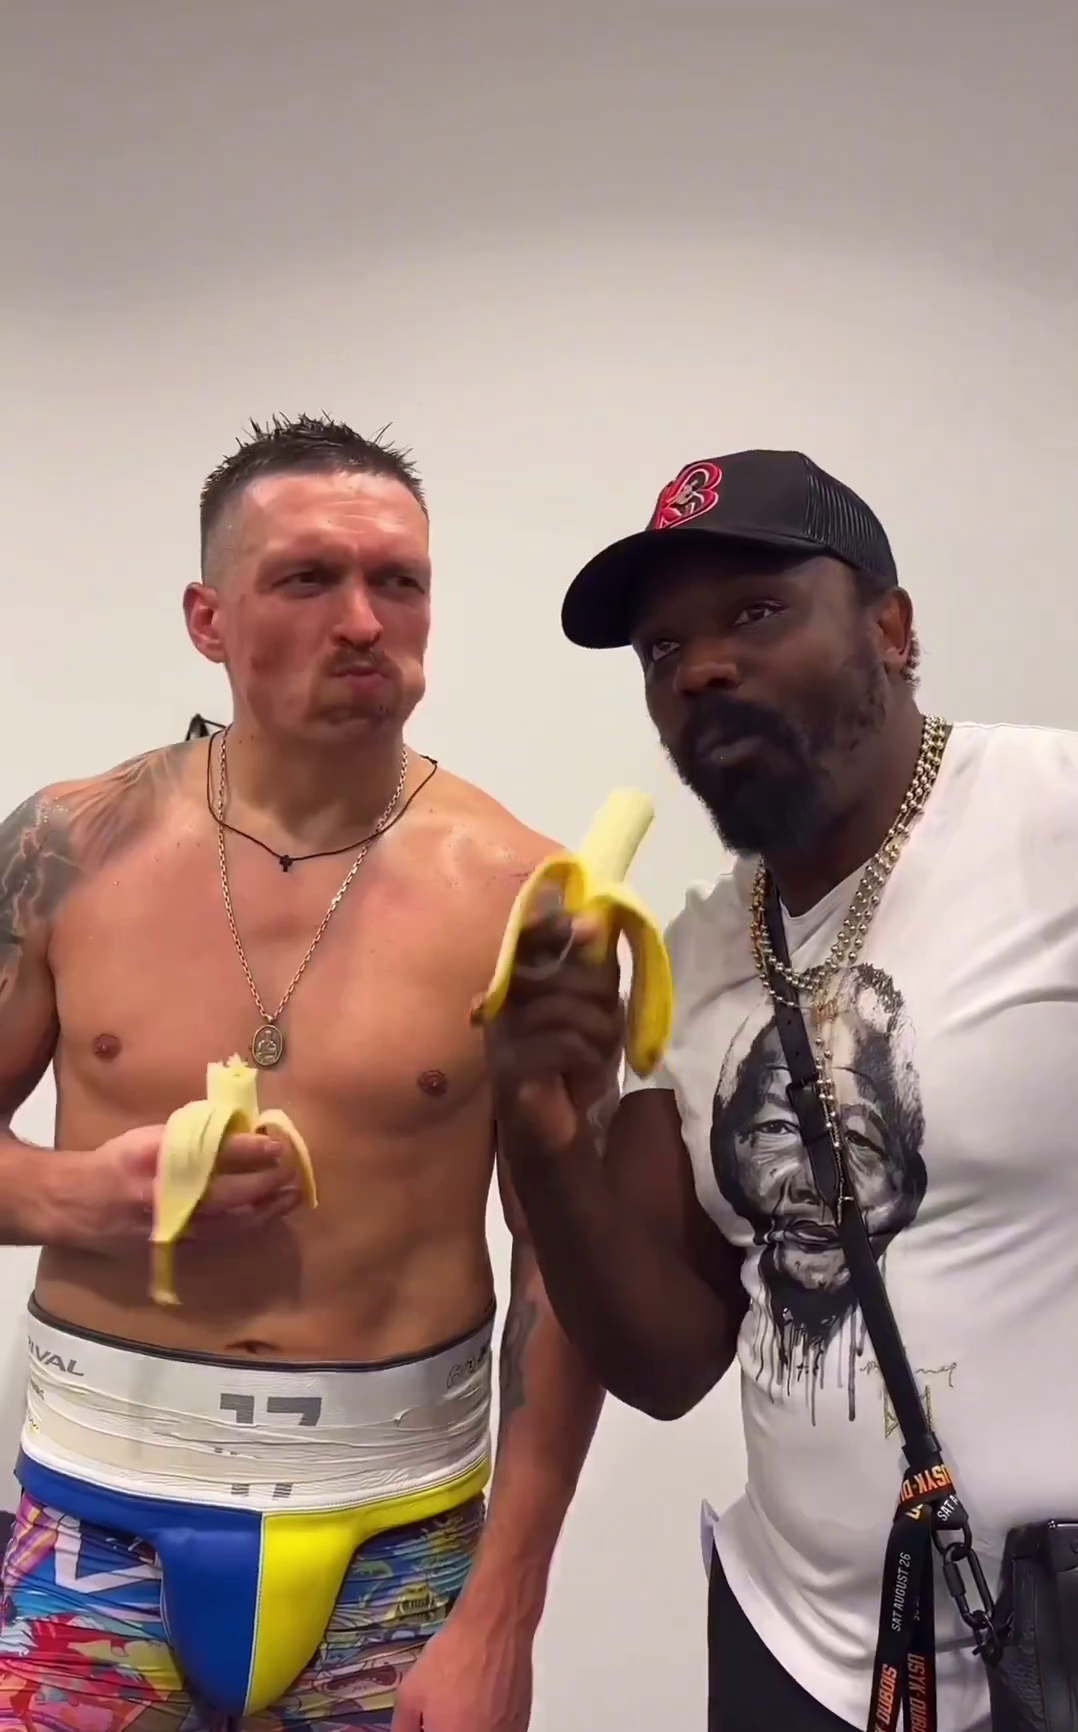 ''It will be a bloodbath'': Chisora tells what to expect in Usyk-Fury fight